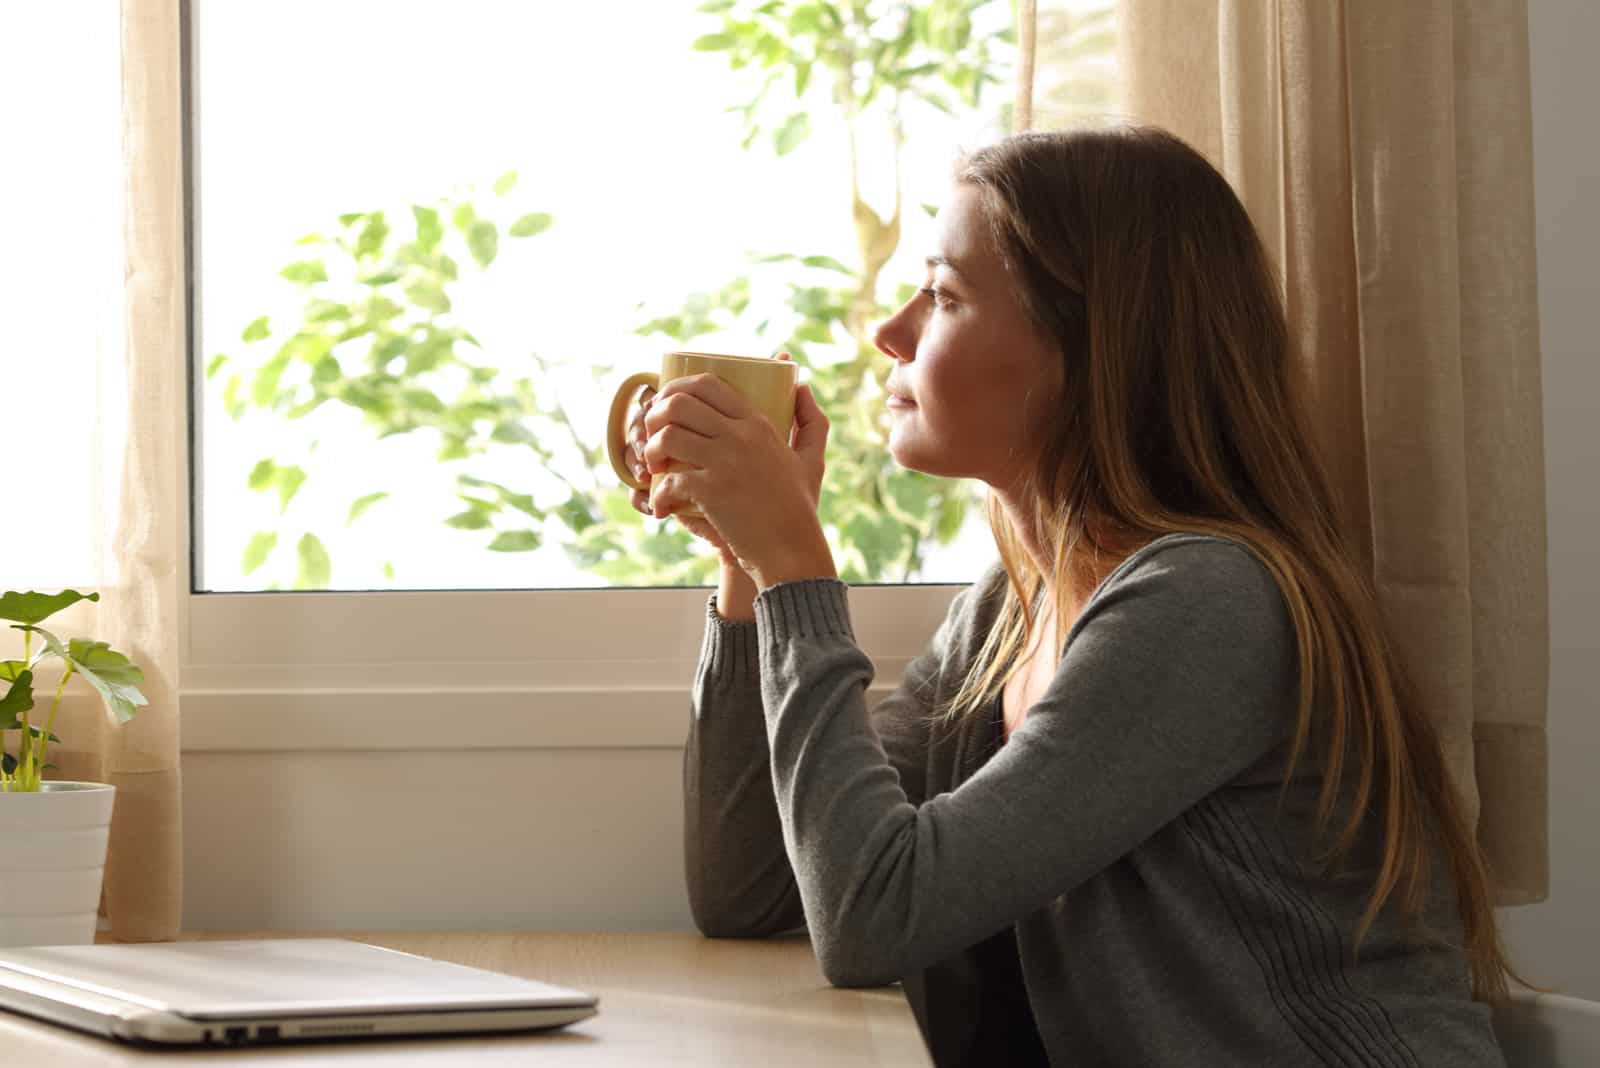 the woman sits by the window drinking coffee and looking around